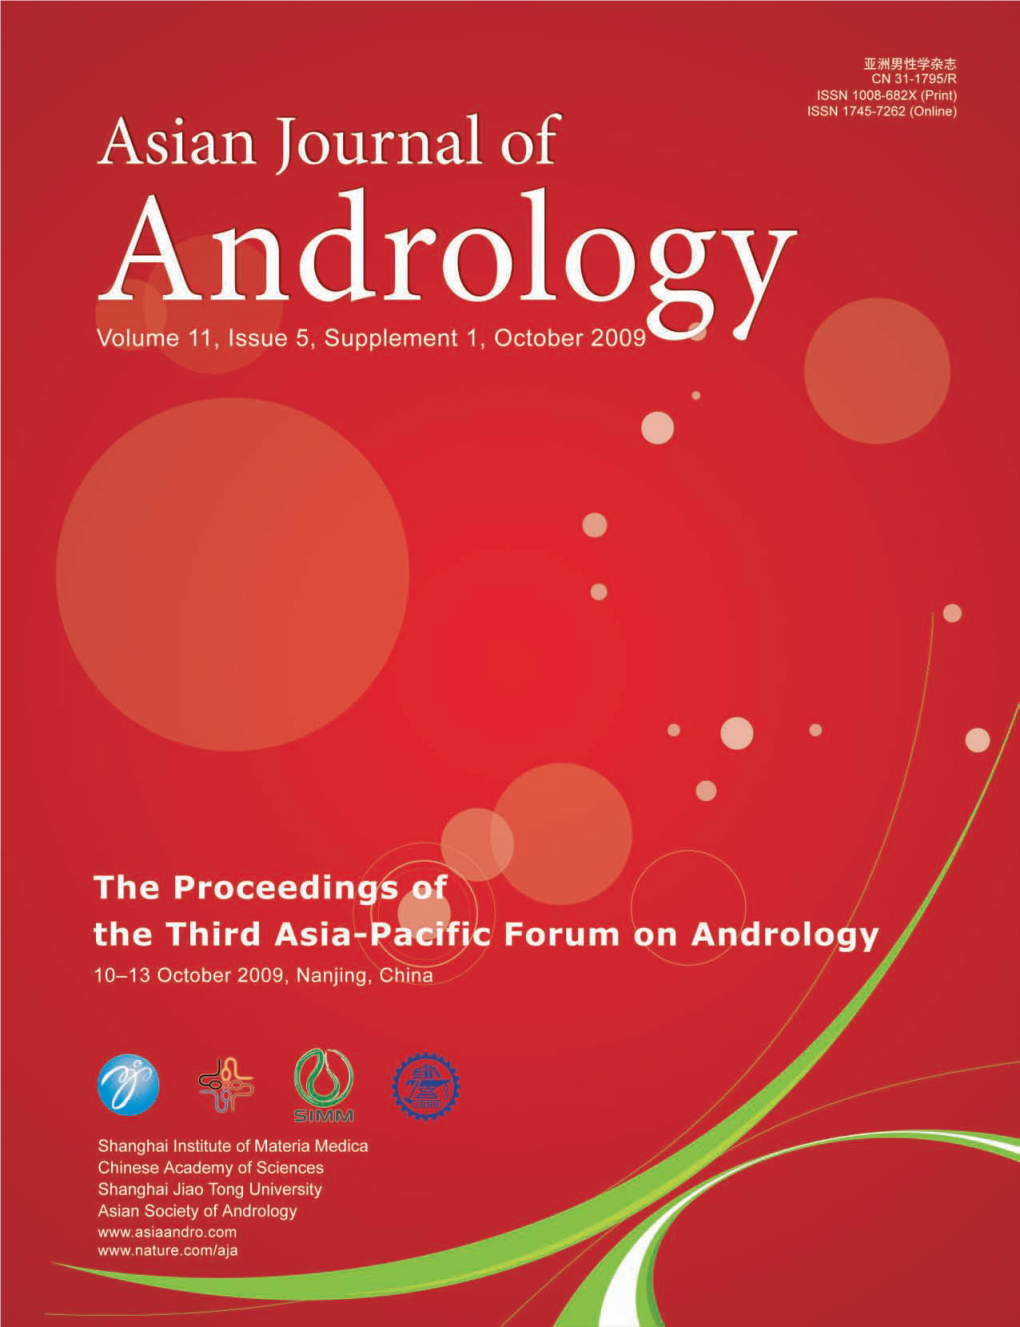 Asian Journal of Andrology—"AJA" Being the Basic Design Element, a Strong Masculine Body Structure Is Created by Traditional Chinese Calligraphy